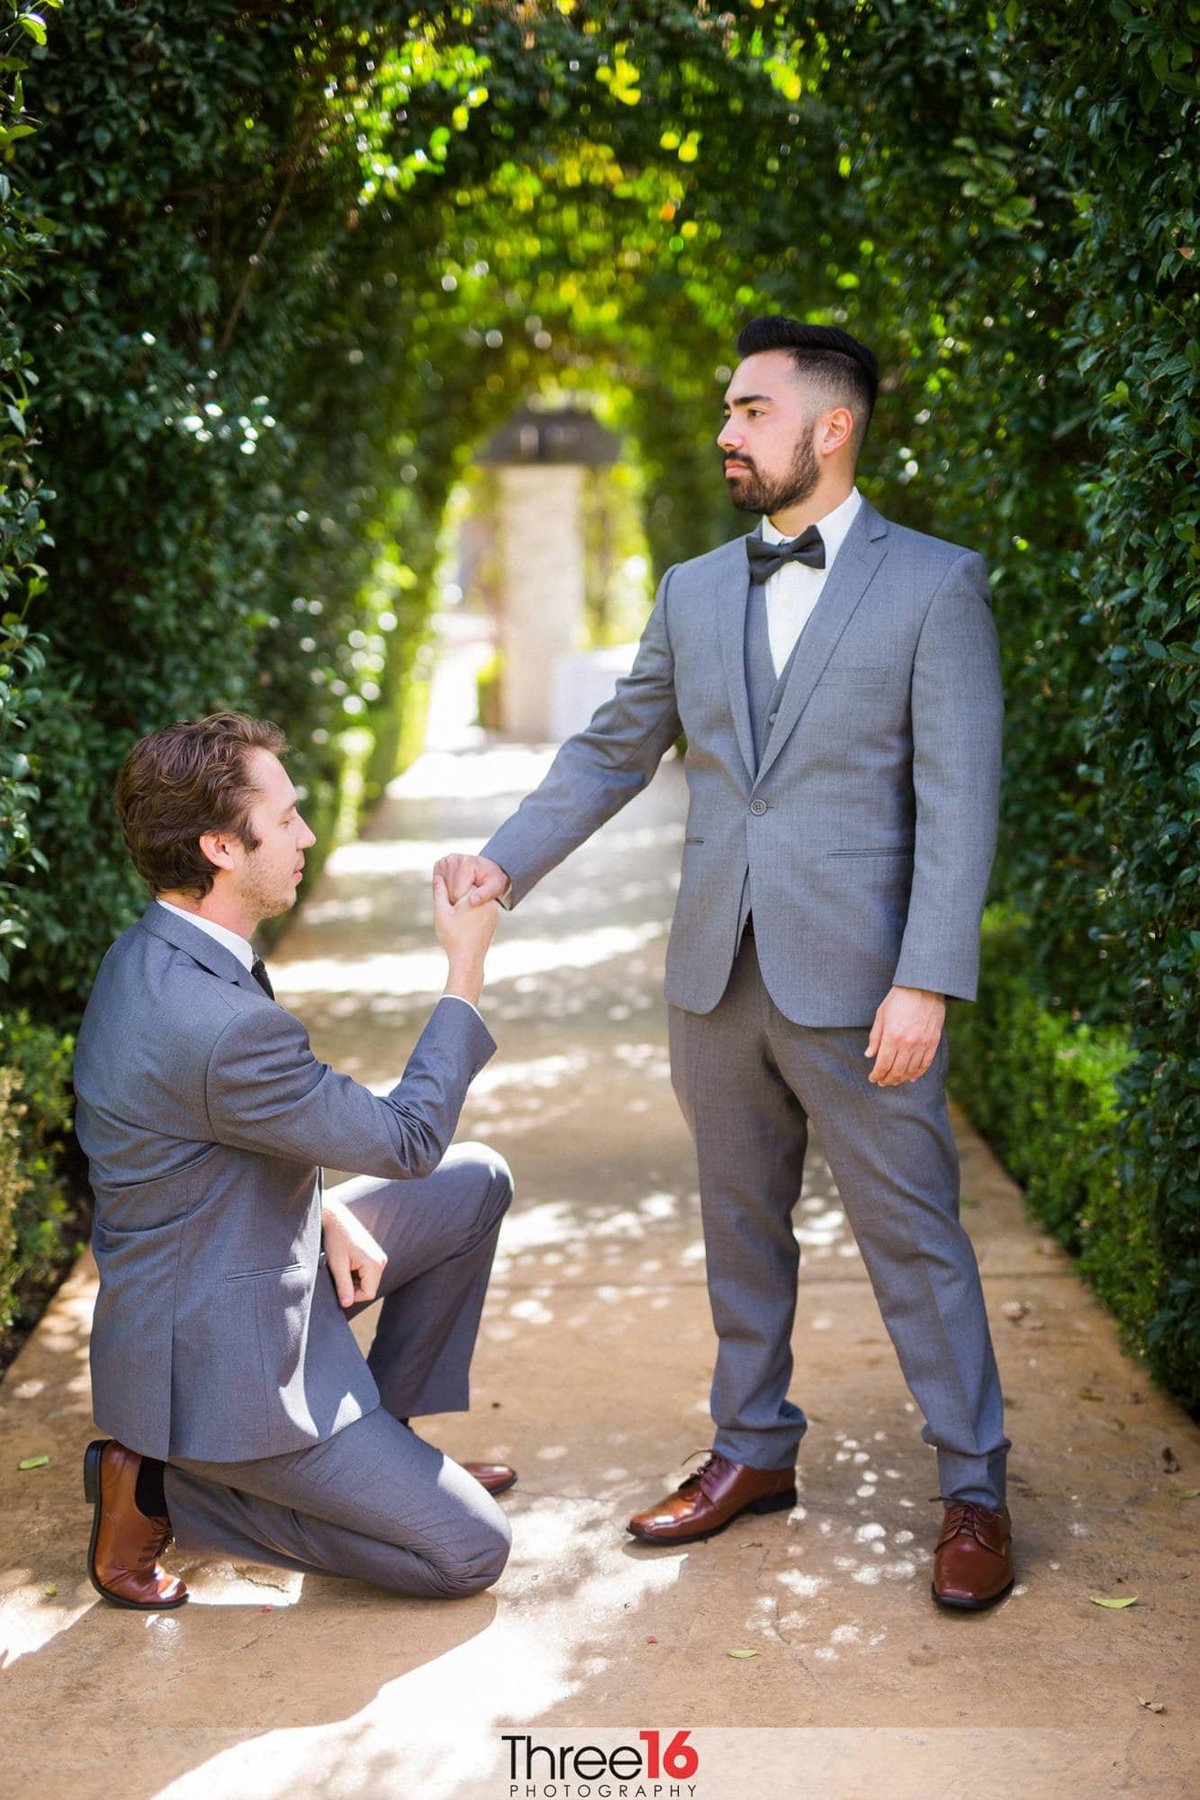 Groom playfully proposes to a Groomsman